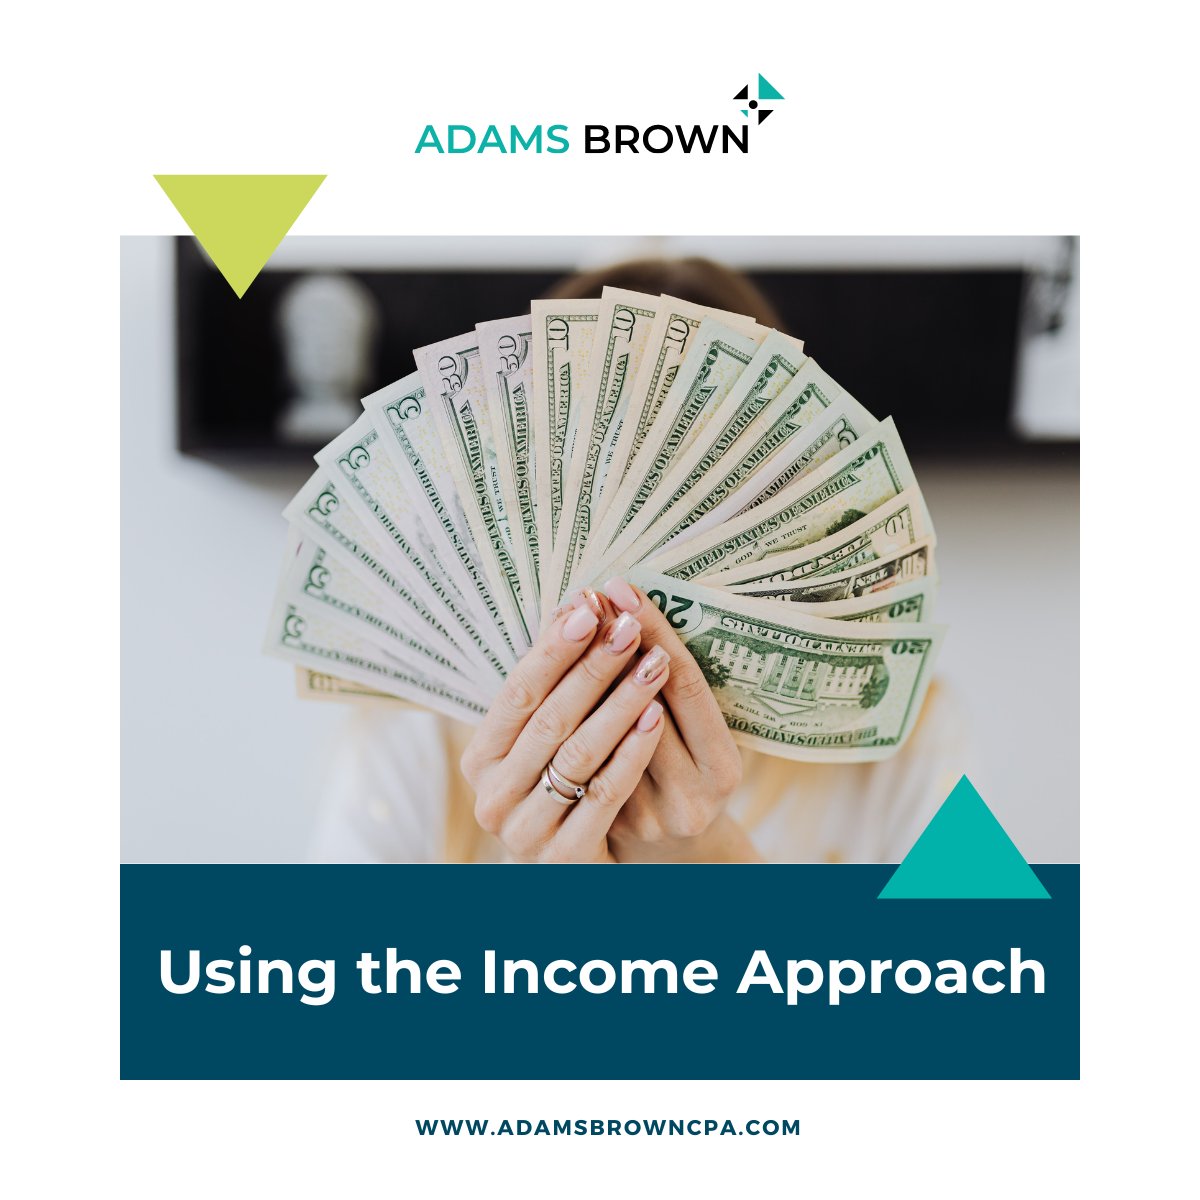 The income approach is generally the most appropriate approach to business valuation for an operating company with positive cash flows. >> hubs.la/Q02x78GT0 #valuation #income #businessincome #businessvaluation